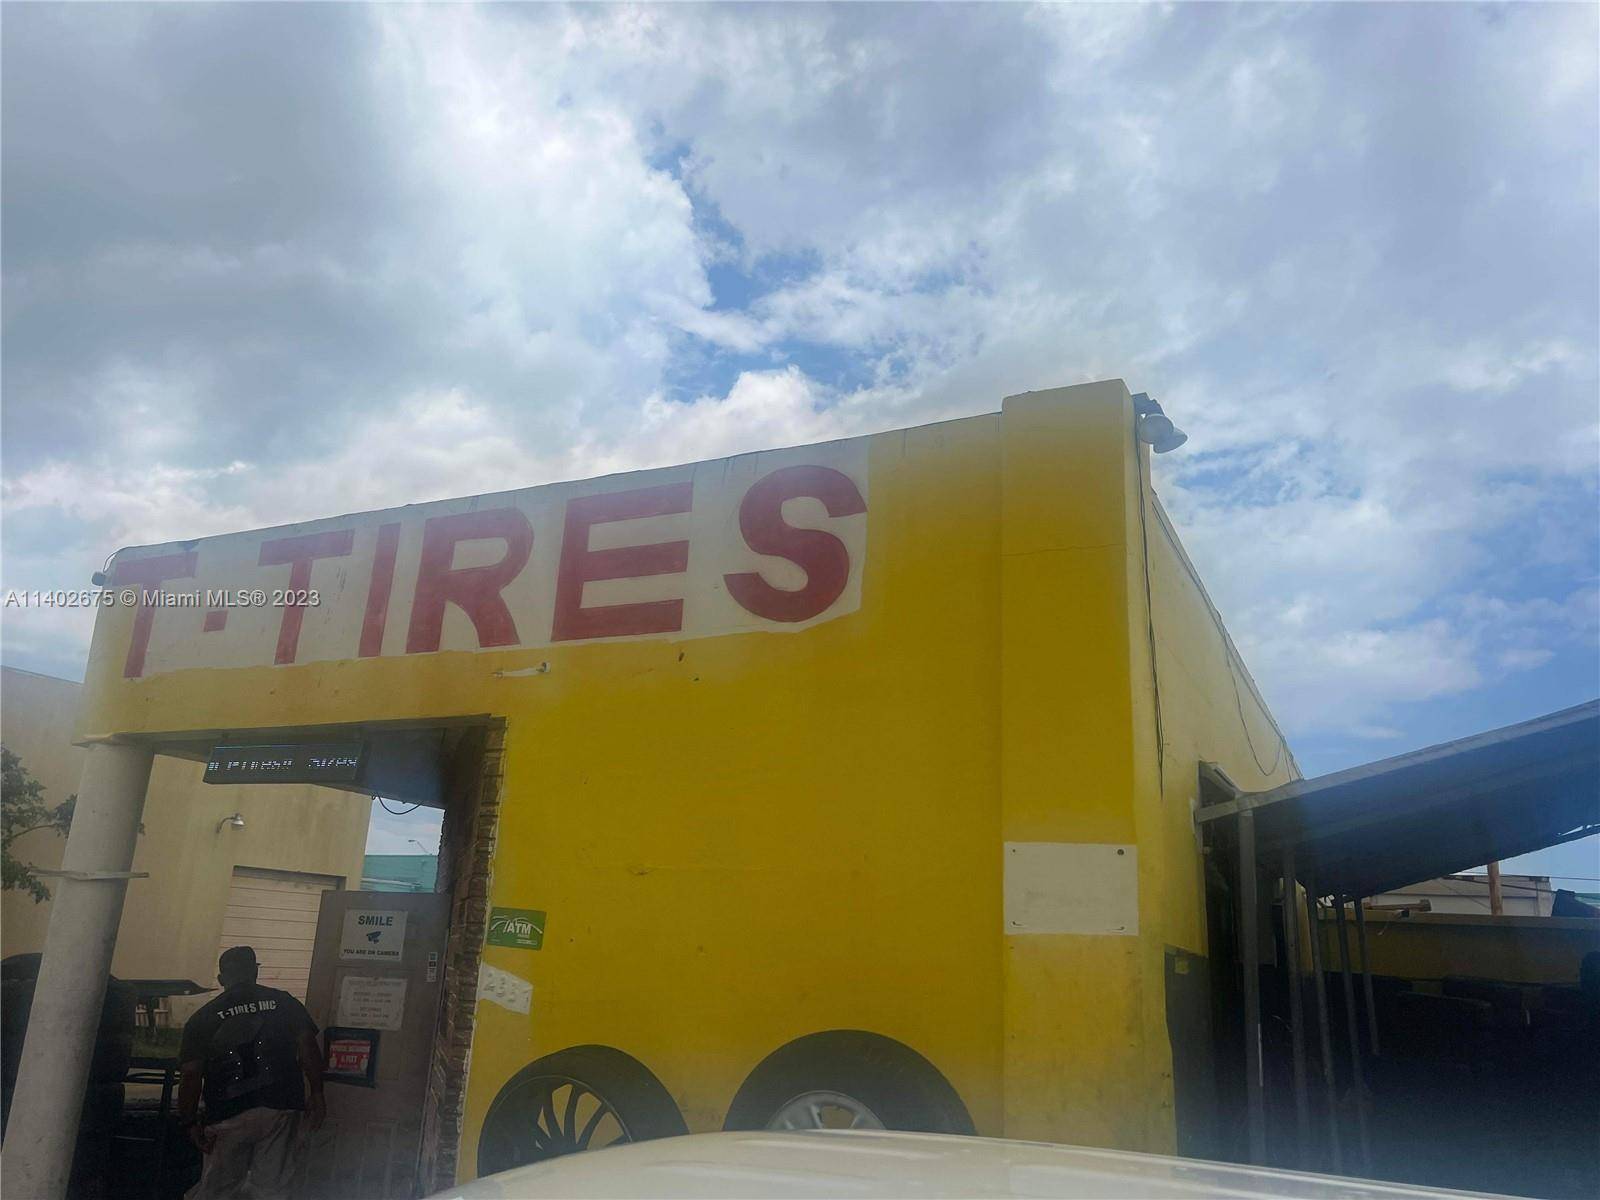 Tire and auto repair business with all equipment's for sale.